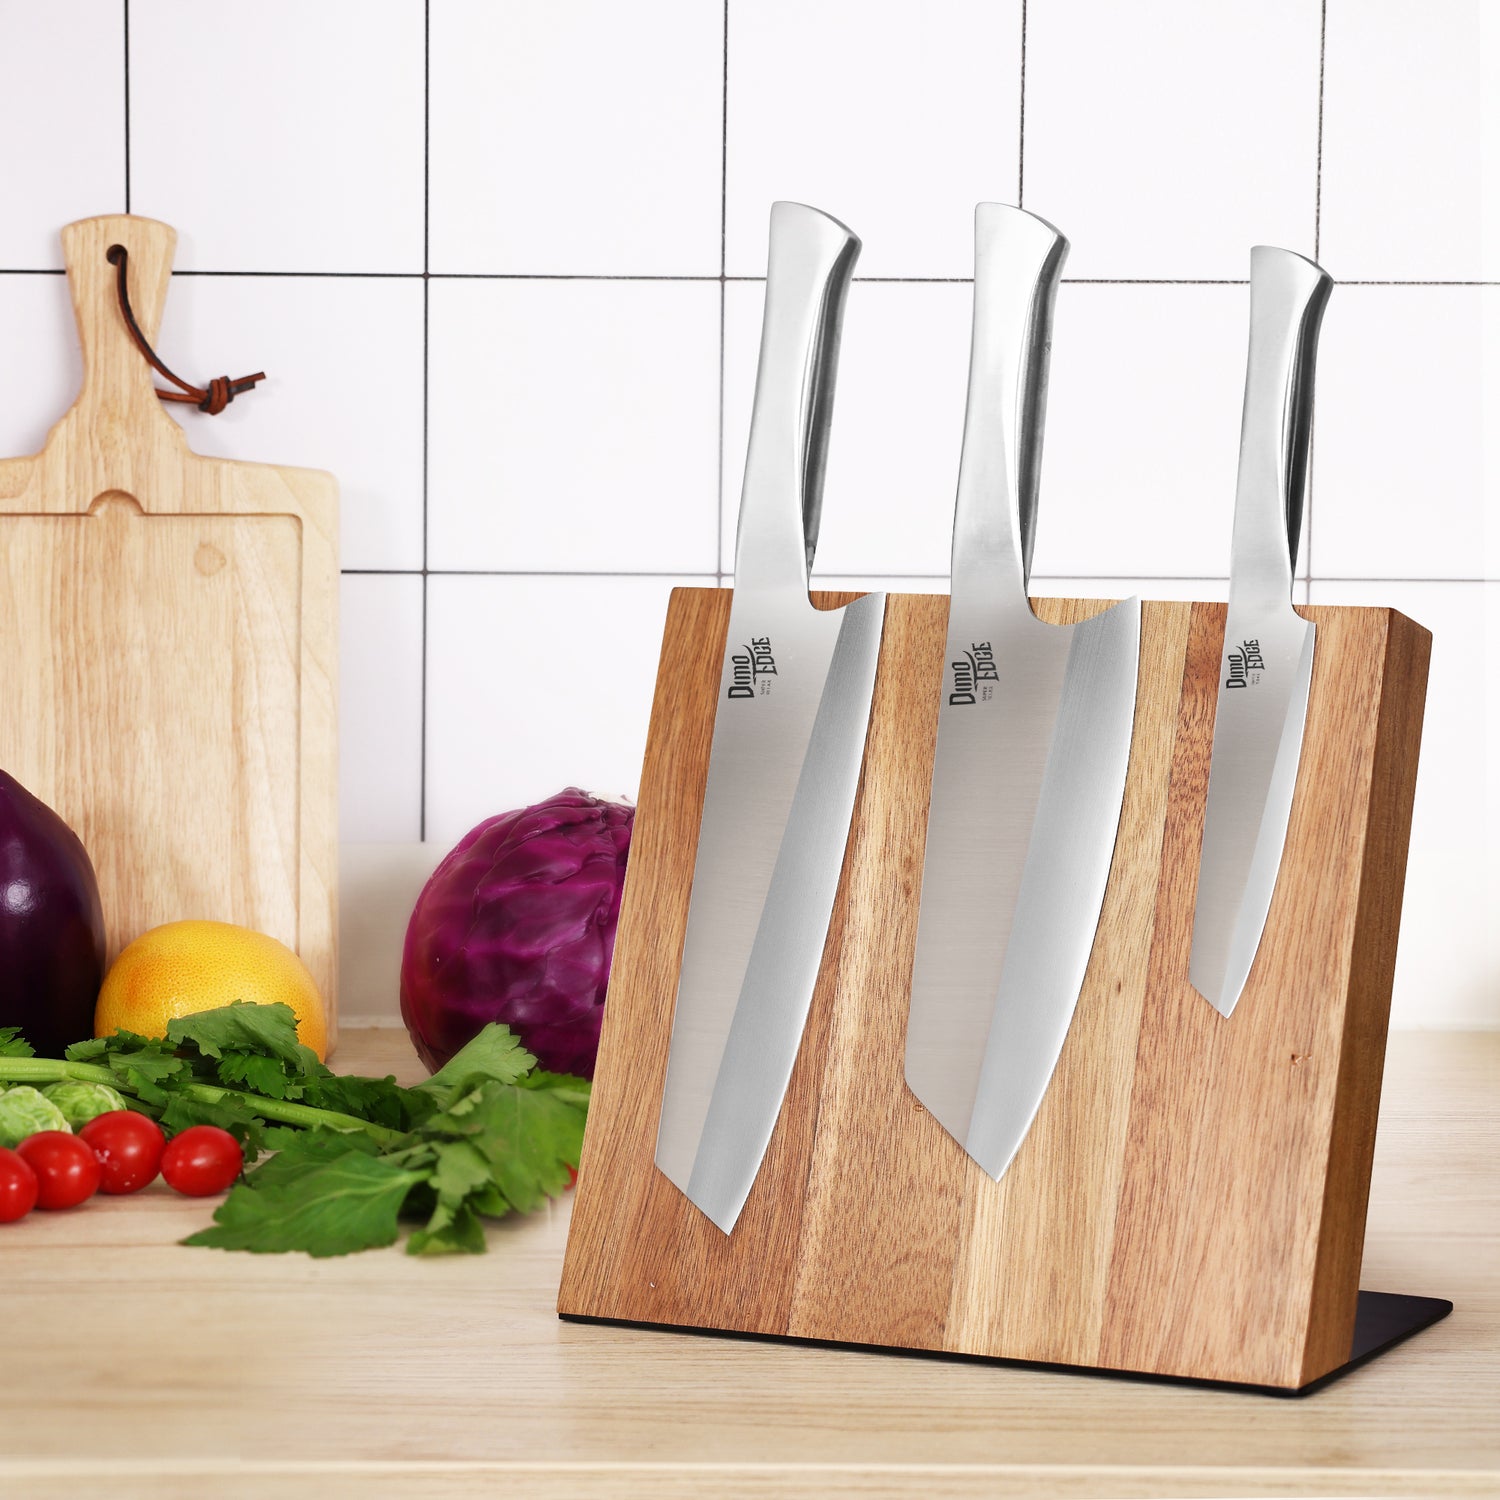 dimoedge Ultra Sharp 3-Piece Kitchen Knife Set, High Carbon Stainless Steel Chef Knife Set, Professional Japanese Knives with Ergonomic Hollow Handle - Hecef Kitchen